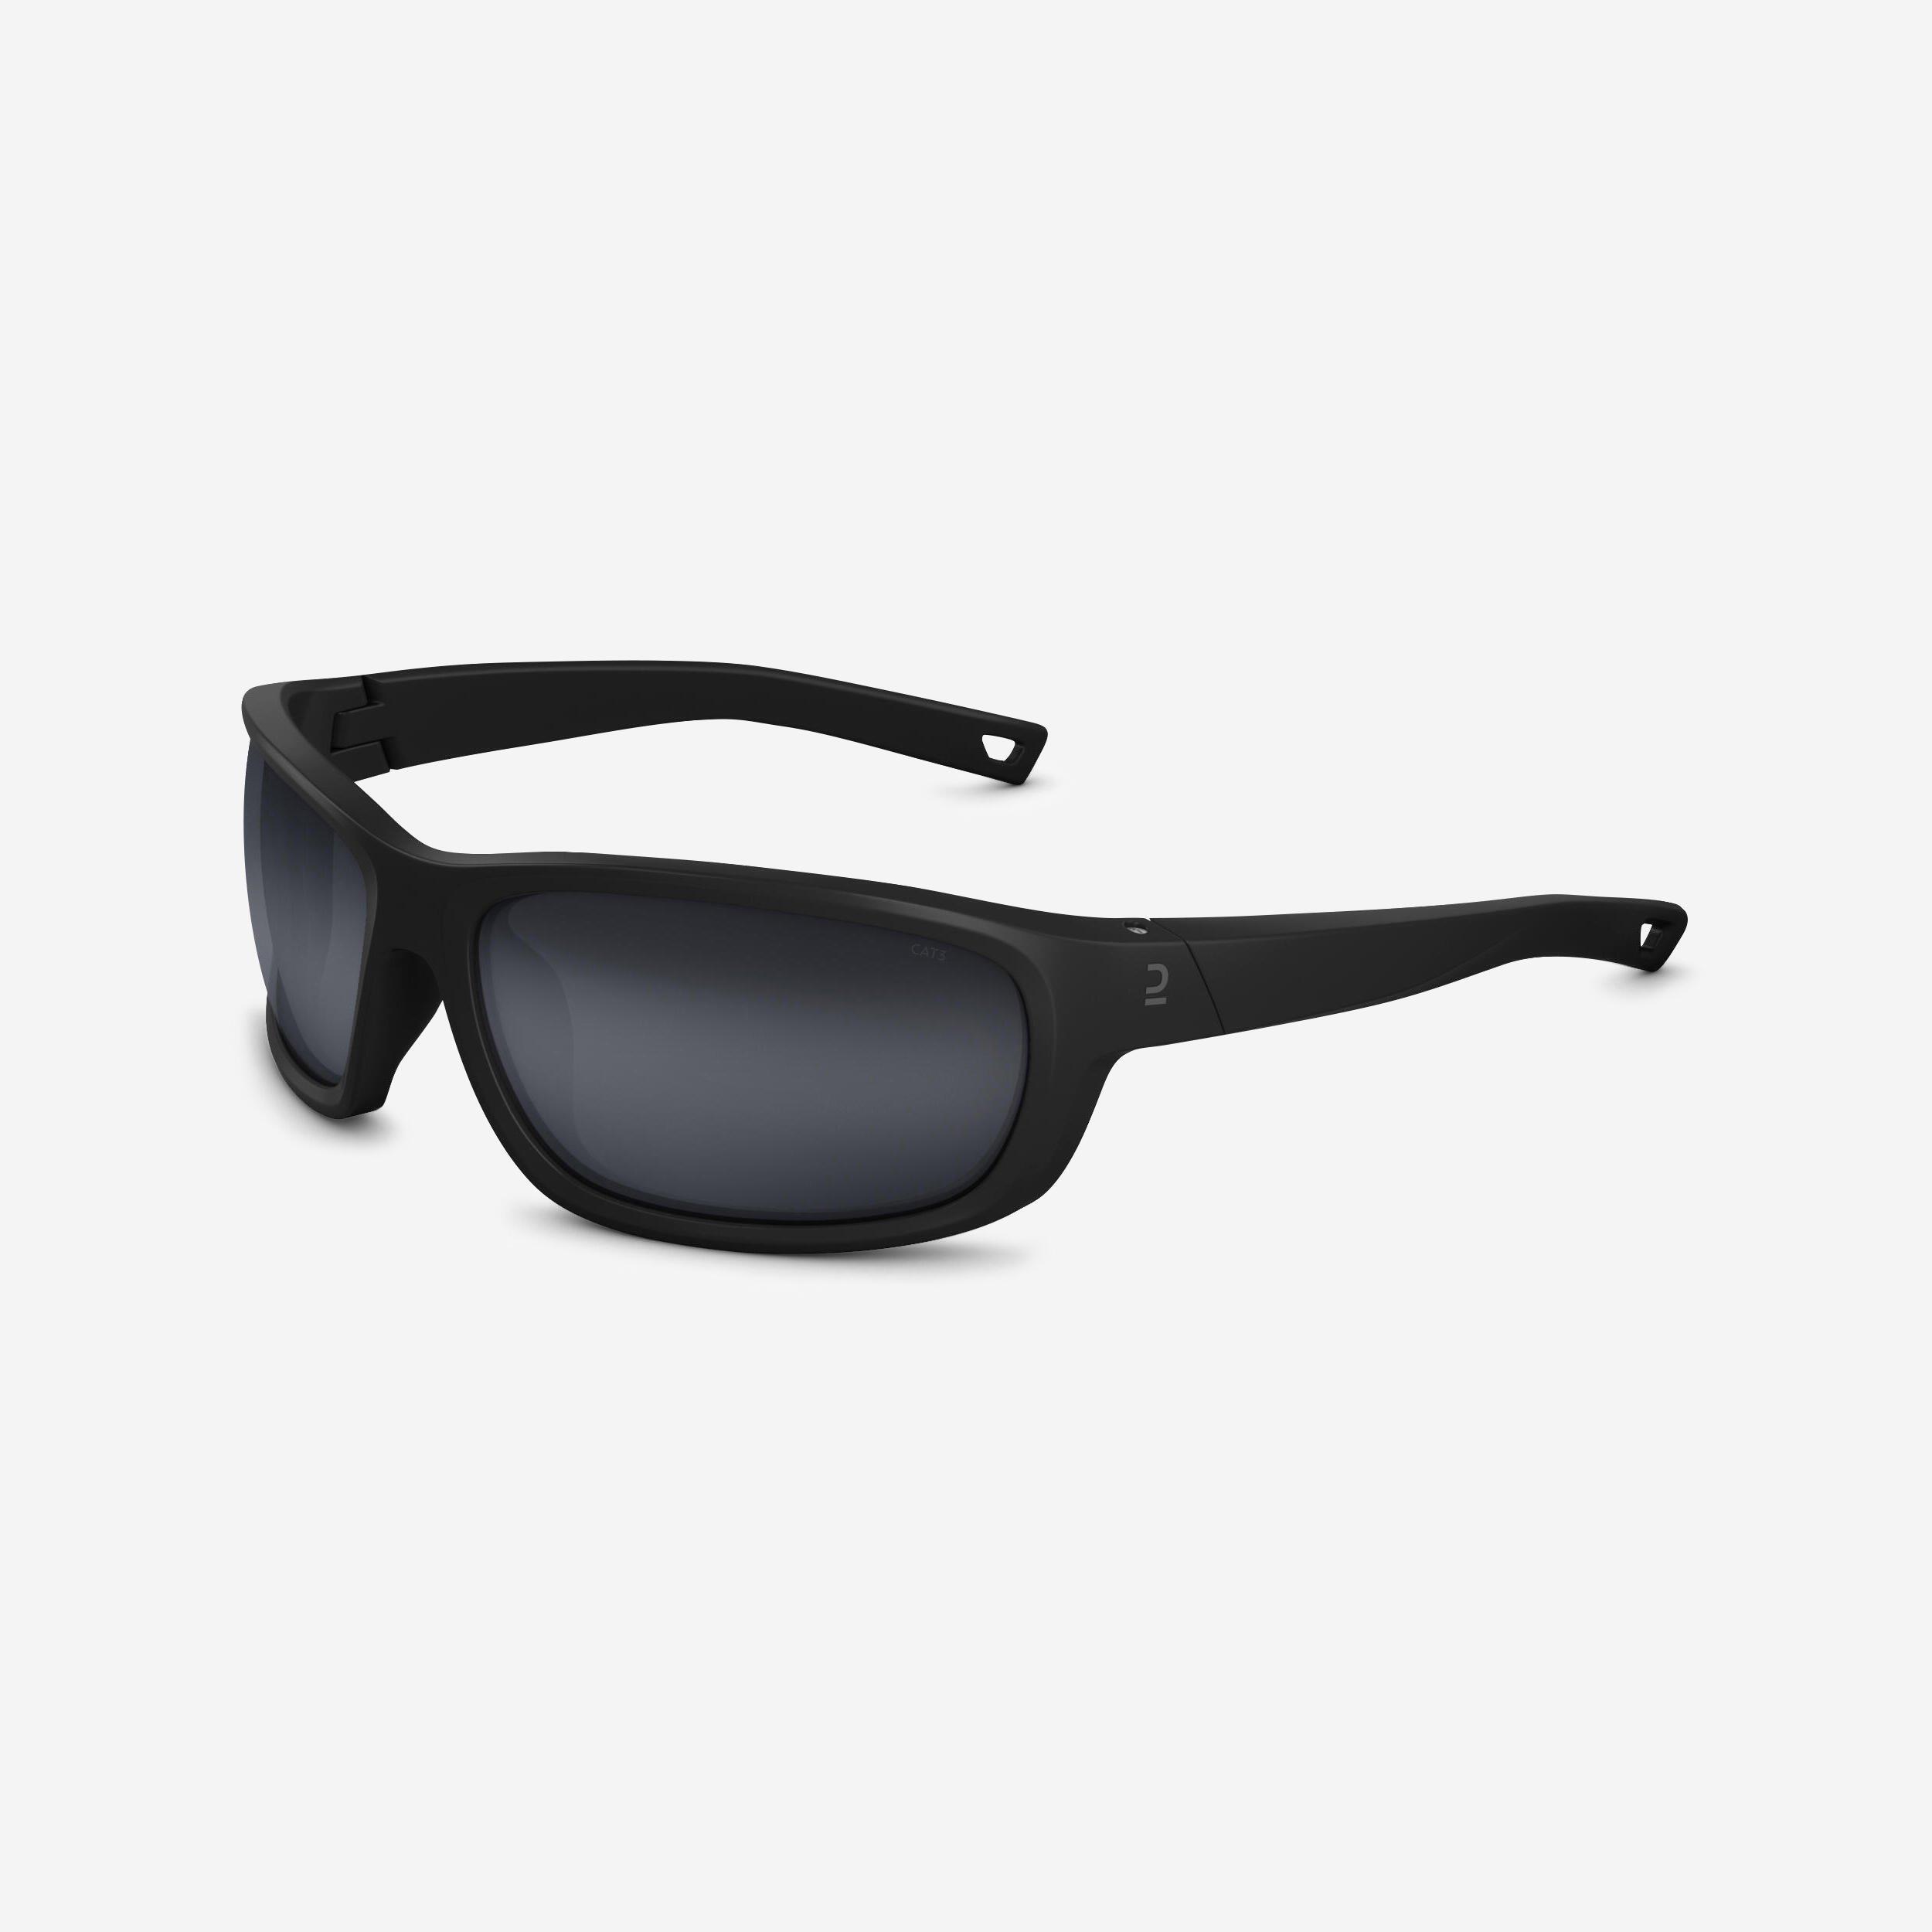 Decathlon Adults' Hiking Sunglasses Mh500 - Category 3